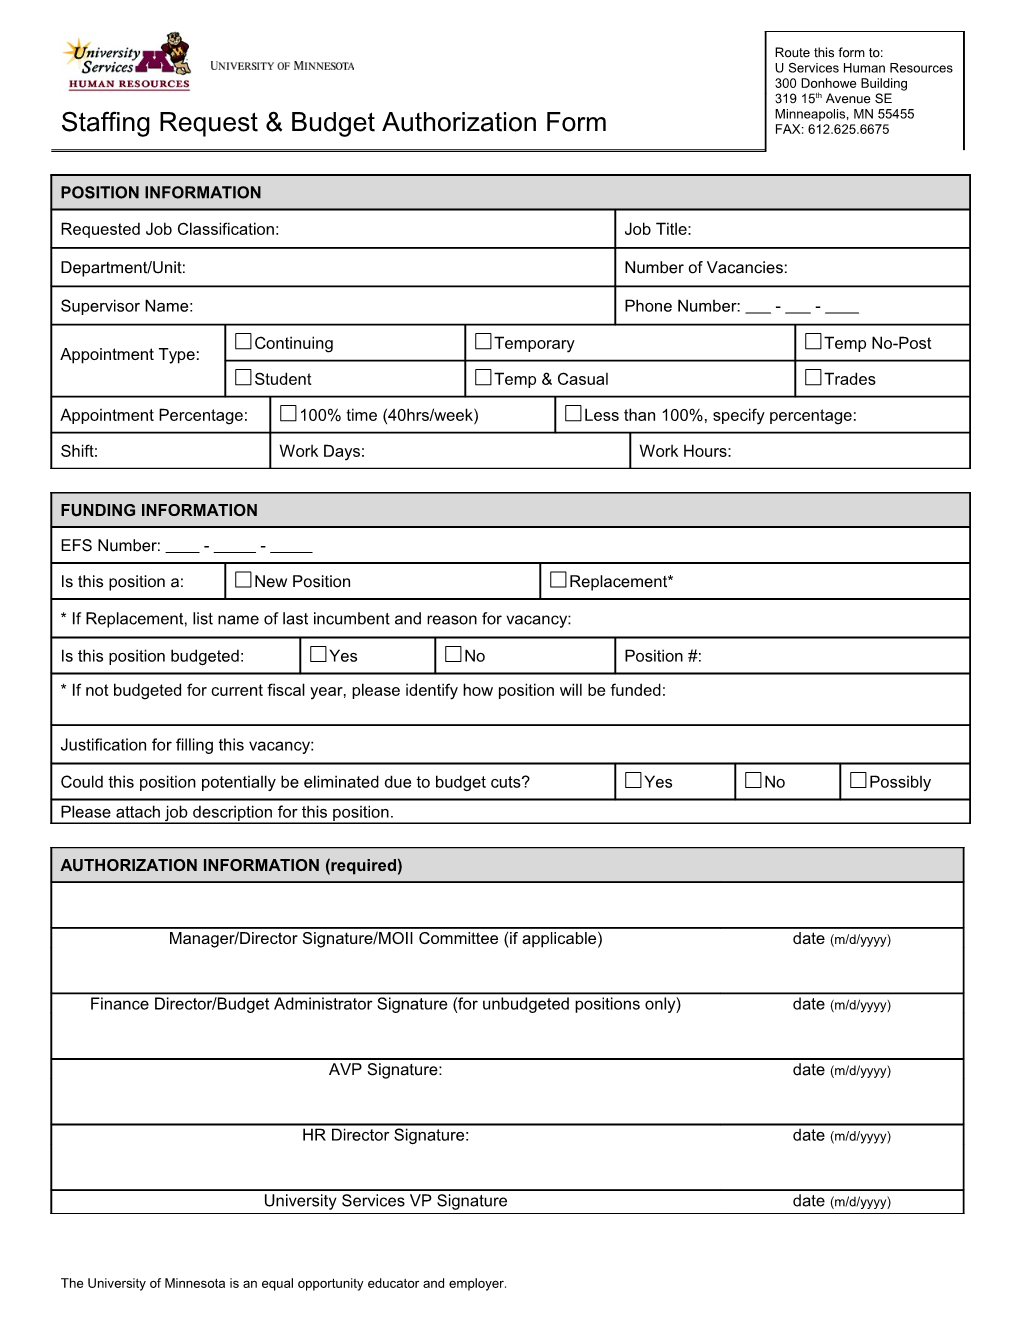 Staffing Request Form Instructions